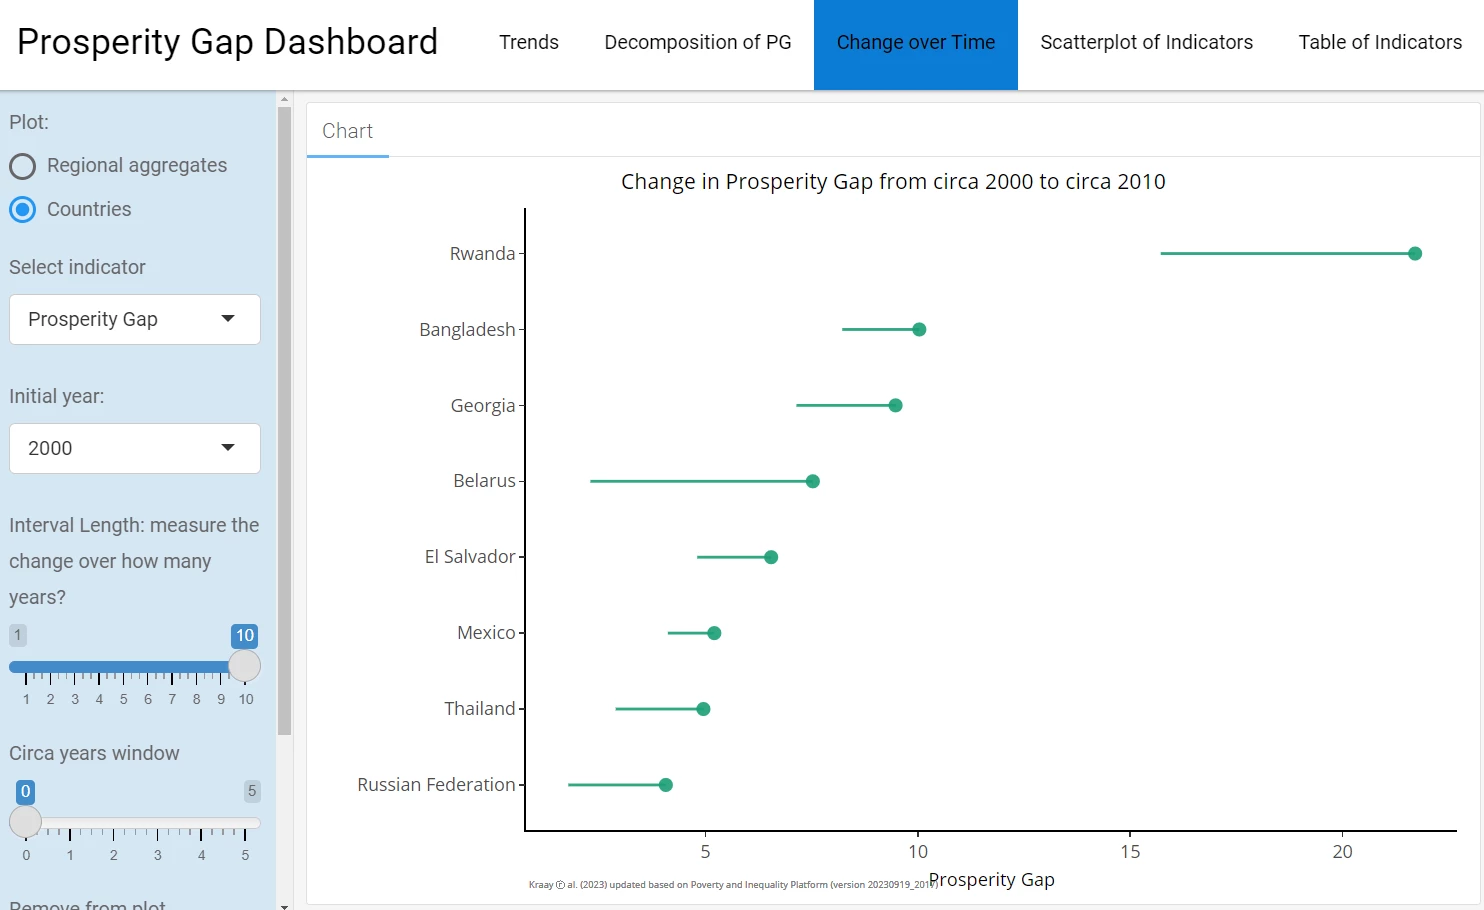 Change in the Prosperity Gaps for countries with surveys in 2000 (starting year, solid dot) and 2010 (ending year).